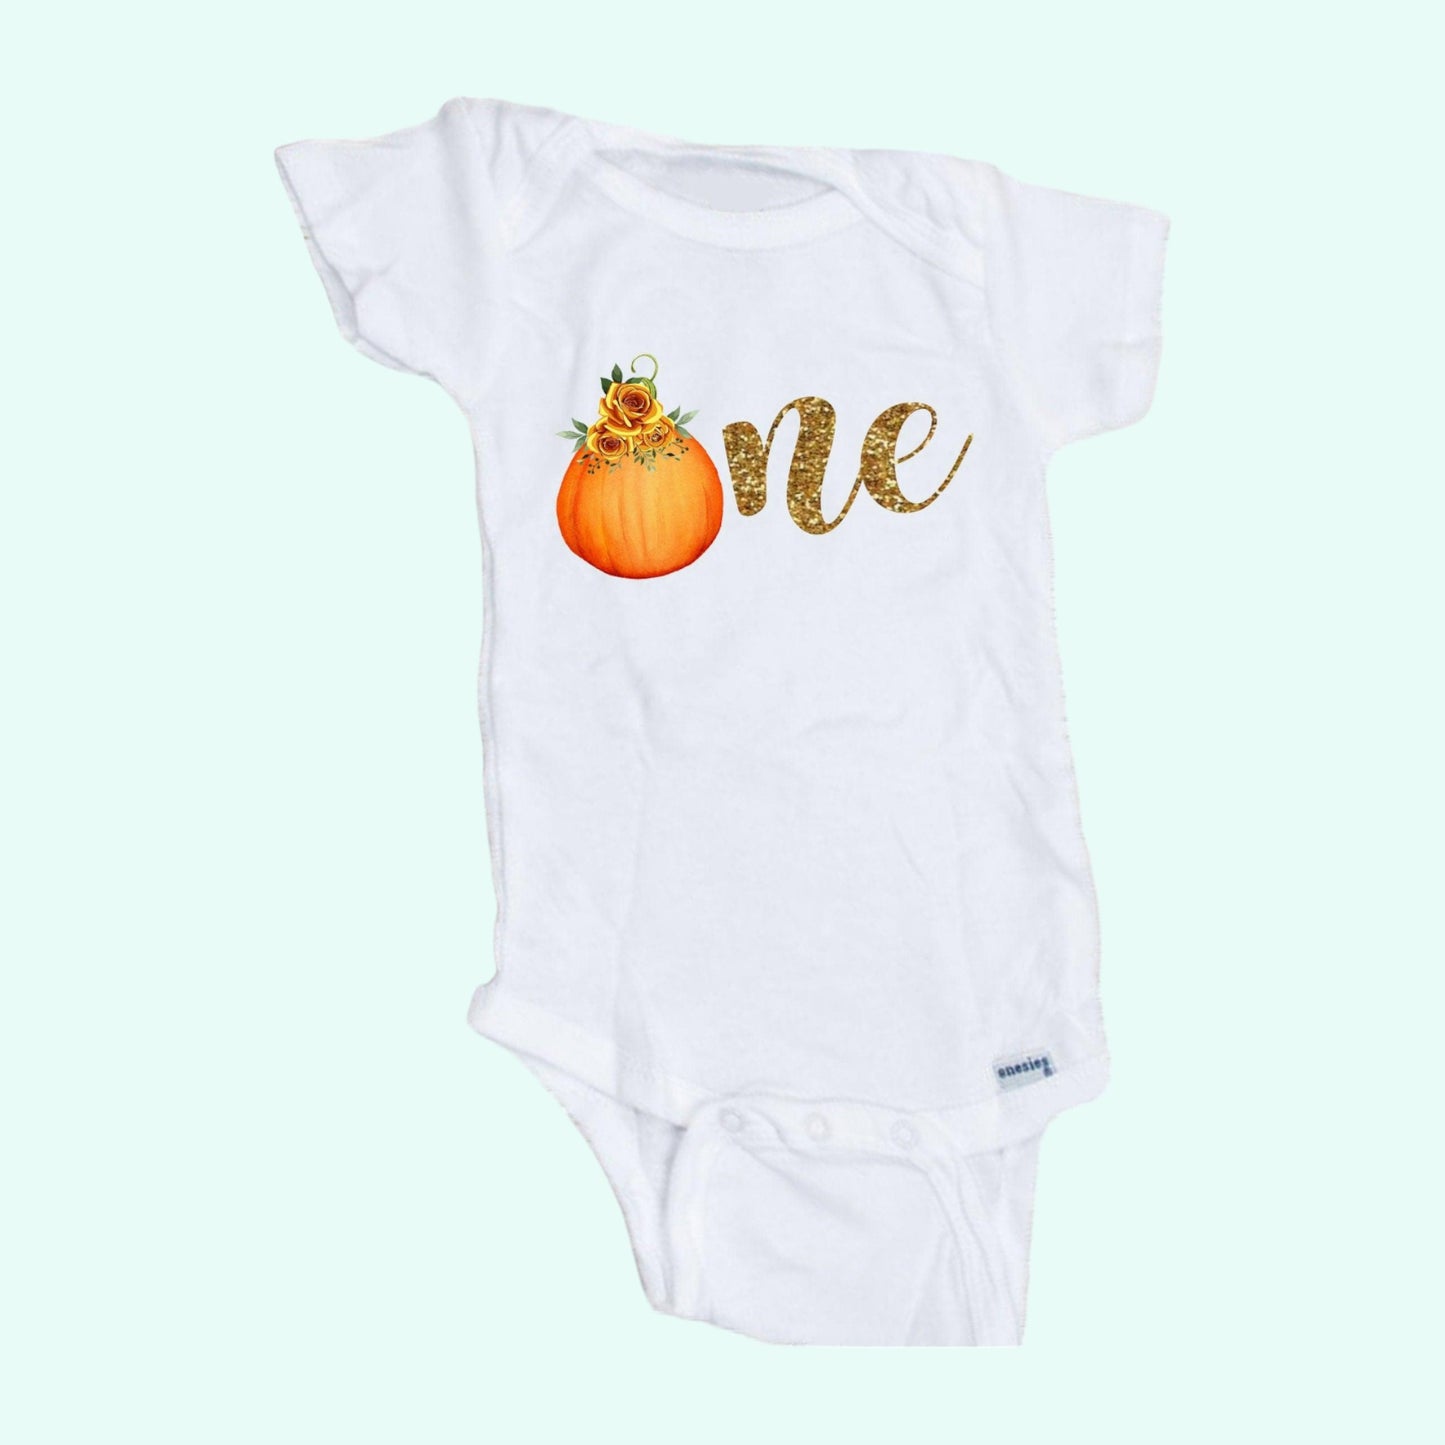 1st birthday outfit short sleeve